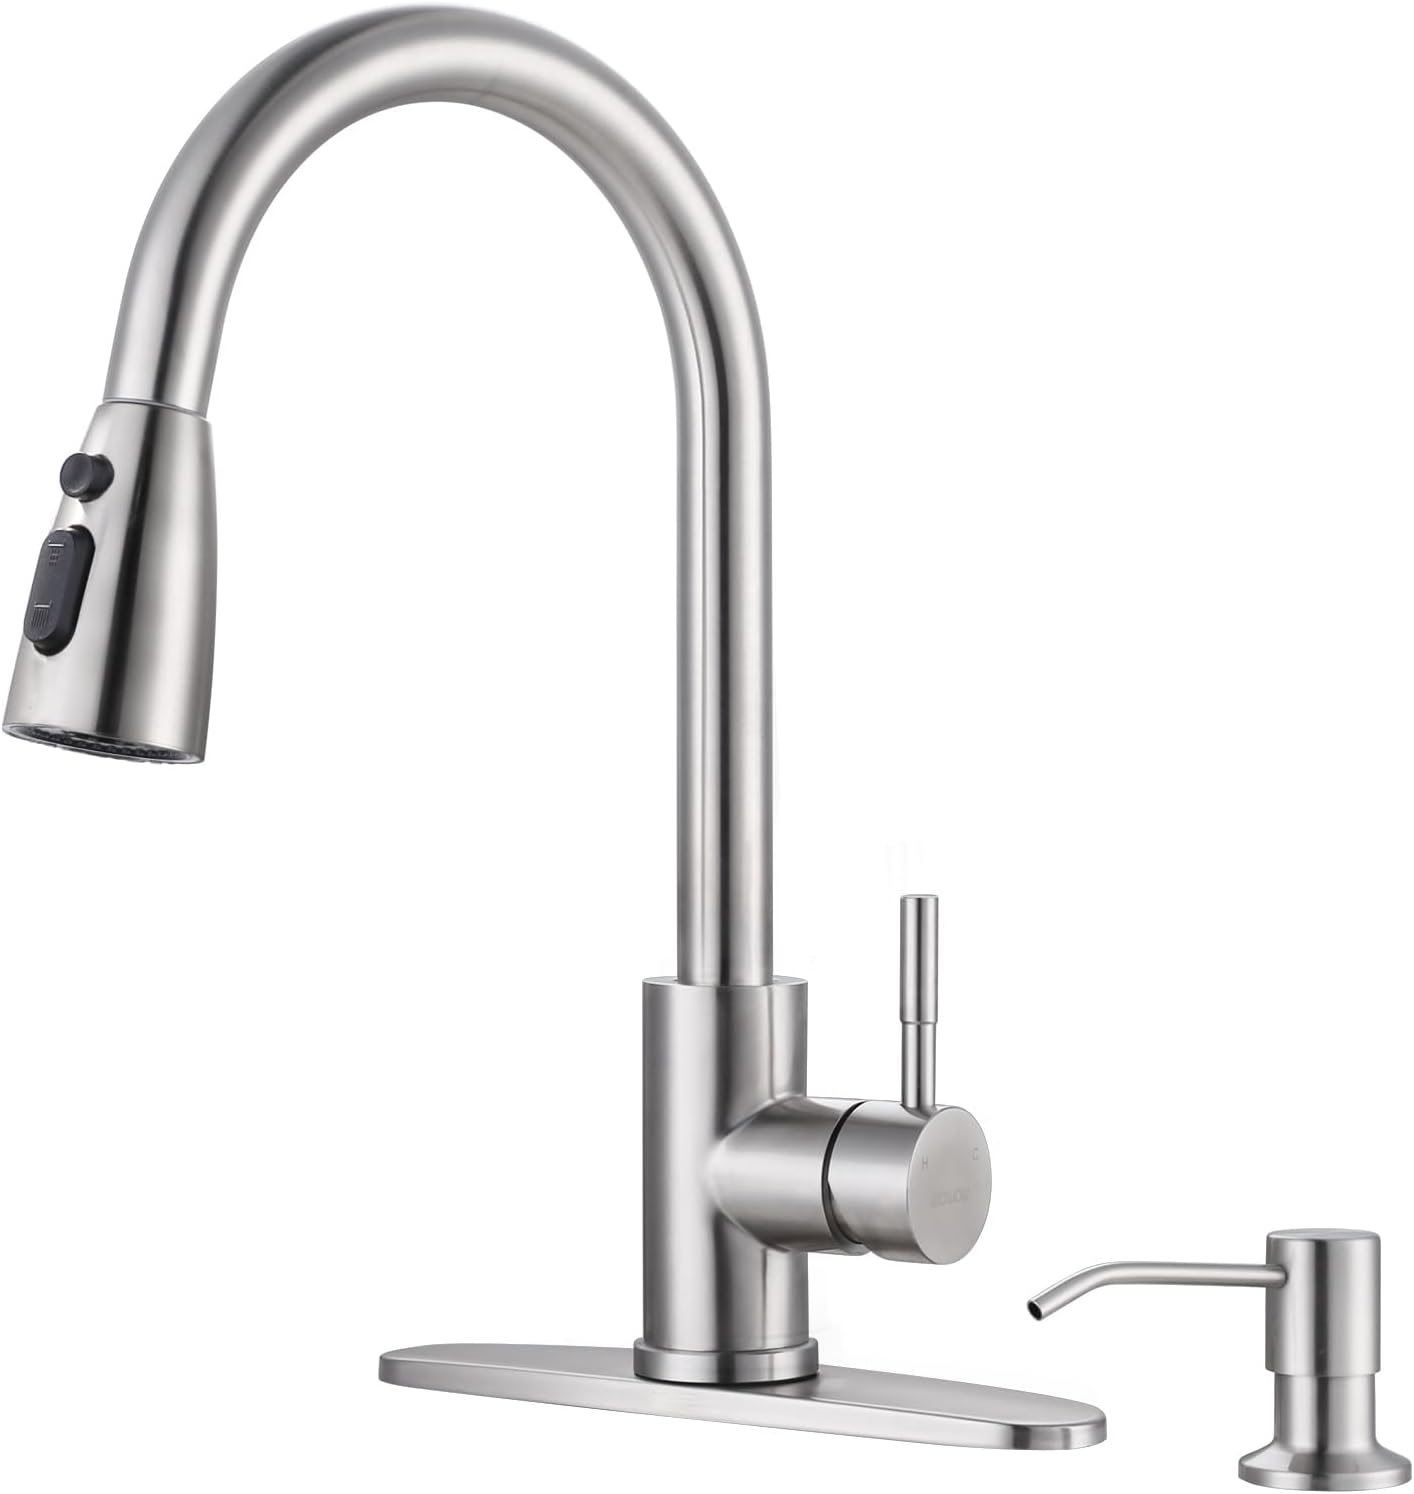 I bought this, not expecting to like it as much as I do! I installed it myself and it was very easy (not handy whatsoever). Not only does it look good, it works great too. Highly recommend if youre looking for a beautiful, inexpensive faucet.